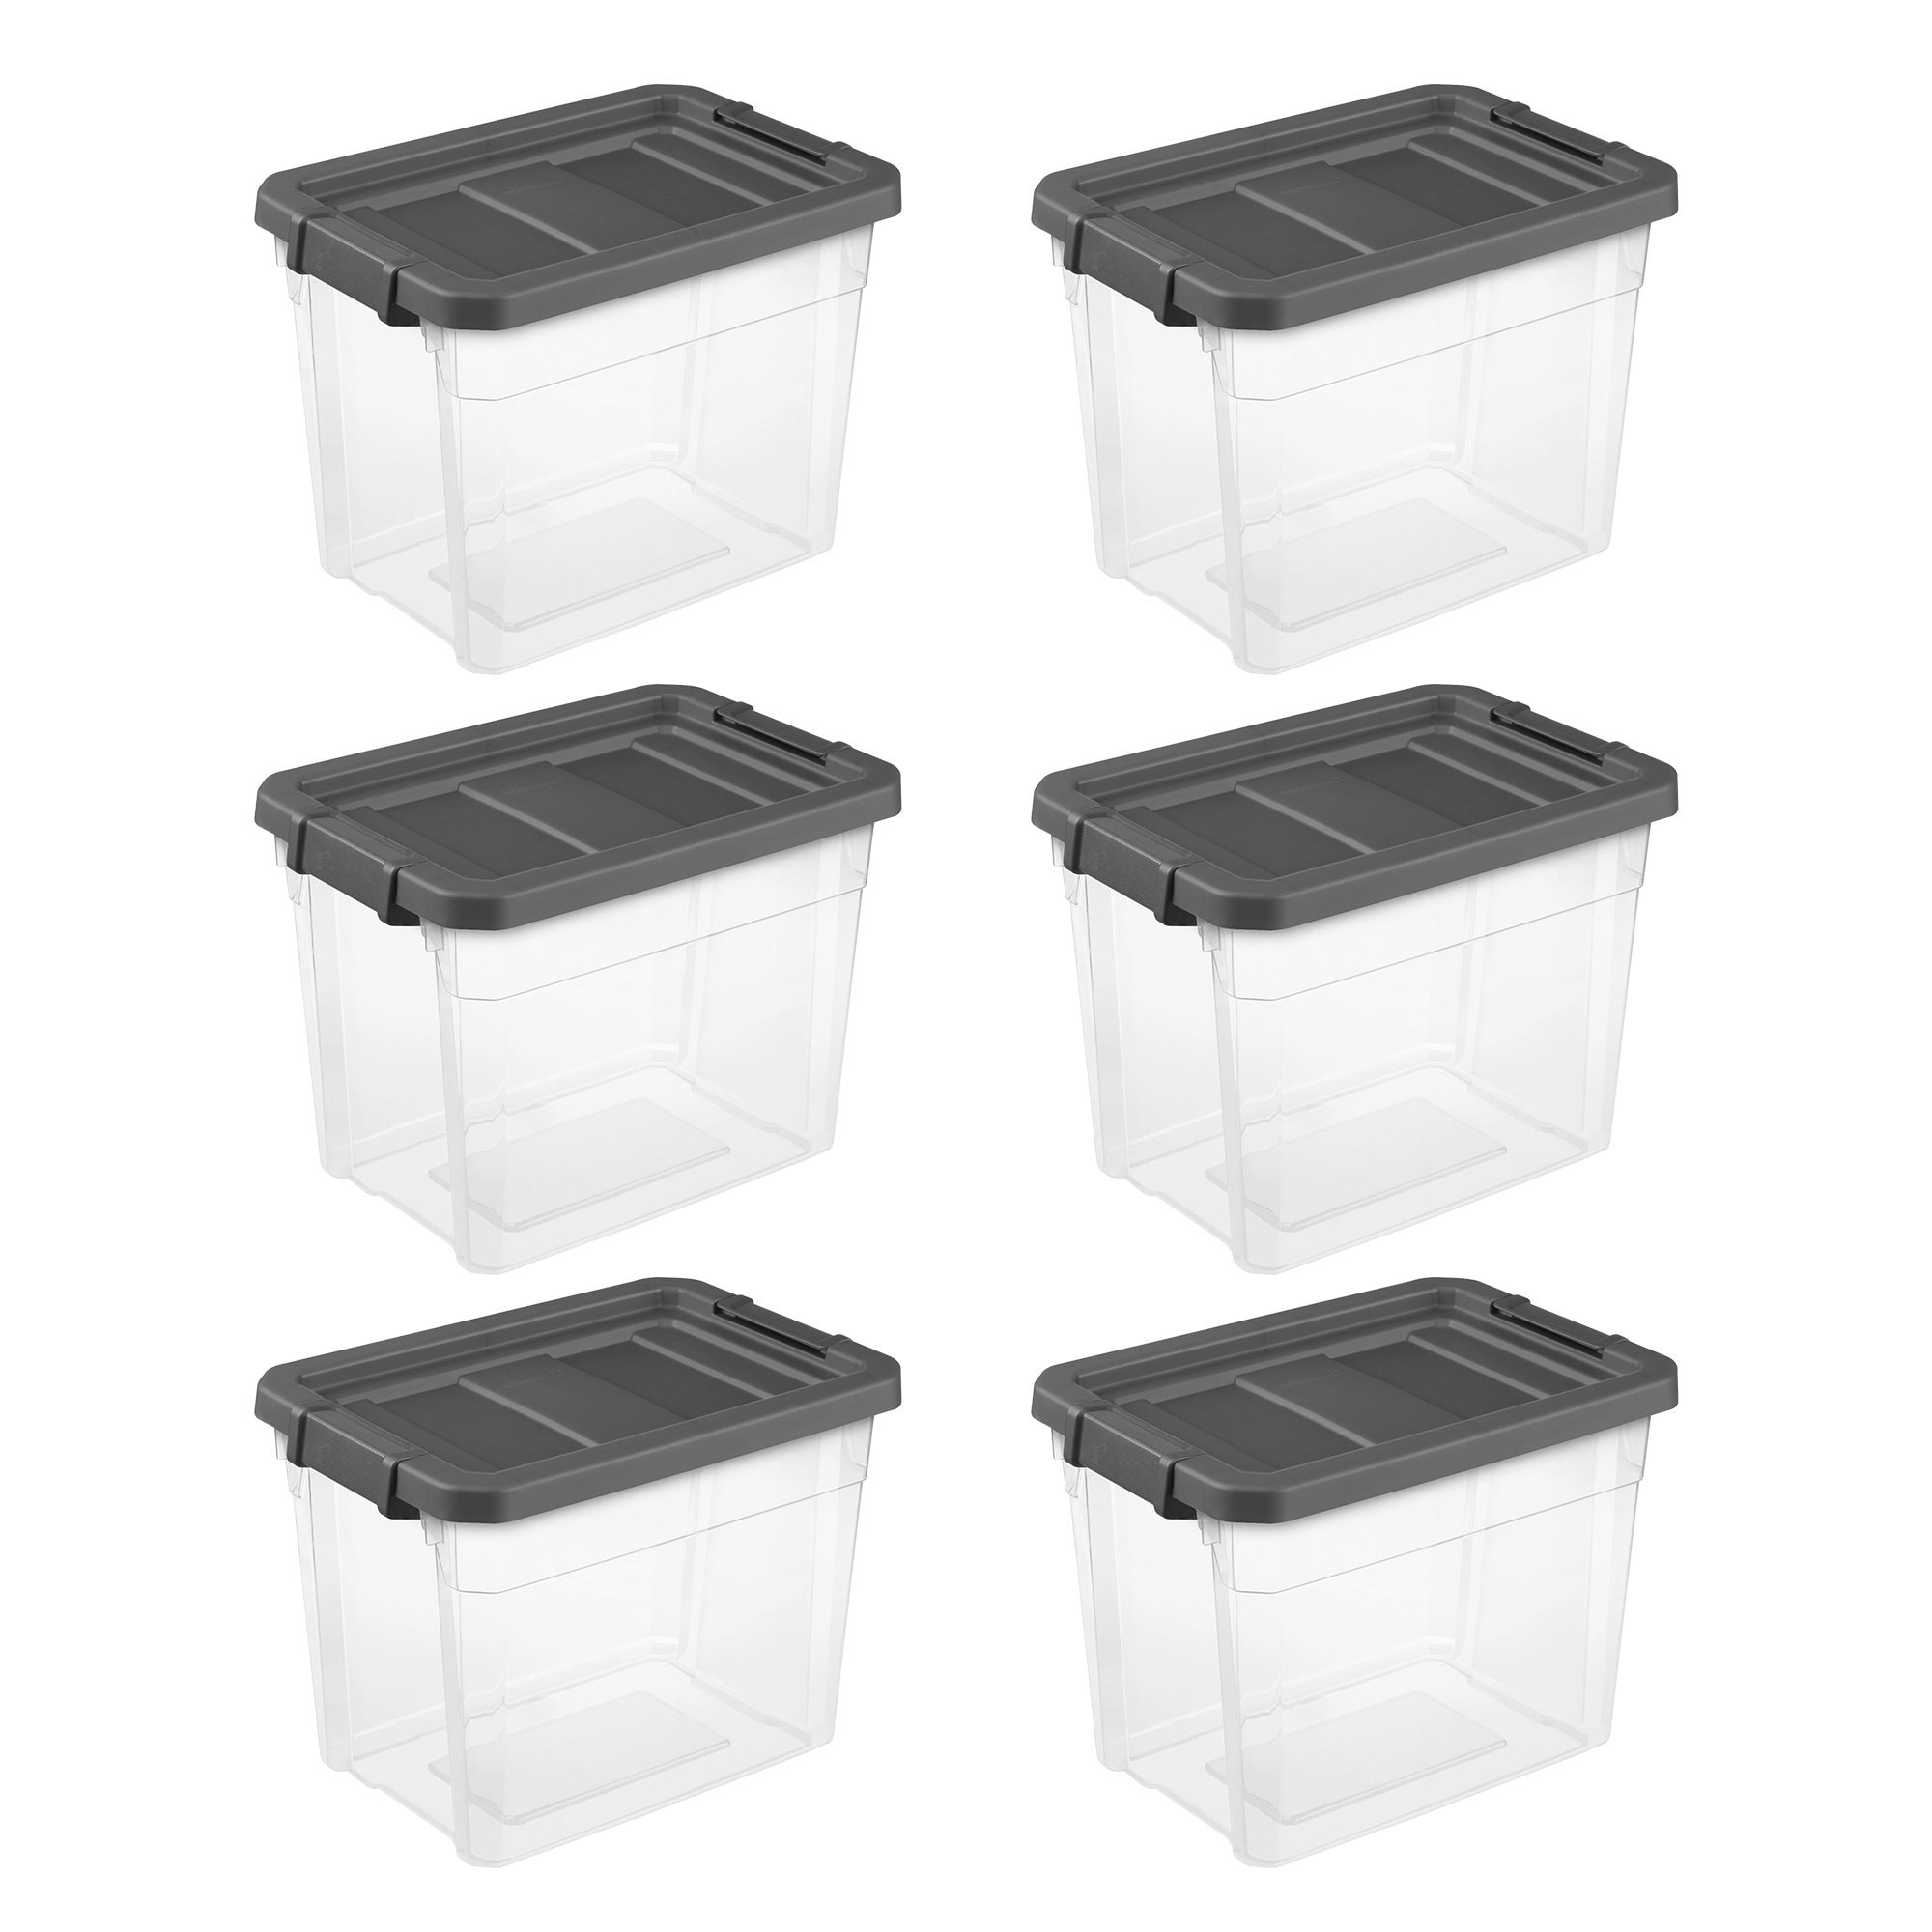 https://ak1.ostkcdn.com/images/products/is/images/direct/7fc82954e422c903edc9f87899c78e94f880c6cf/Sterilite-30-Qt-Clear-Plastic-Stackable-Storage-Bin-with-Grey-Latch-Lid%2C-6-Pack.jpg